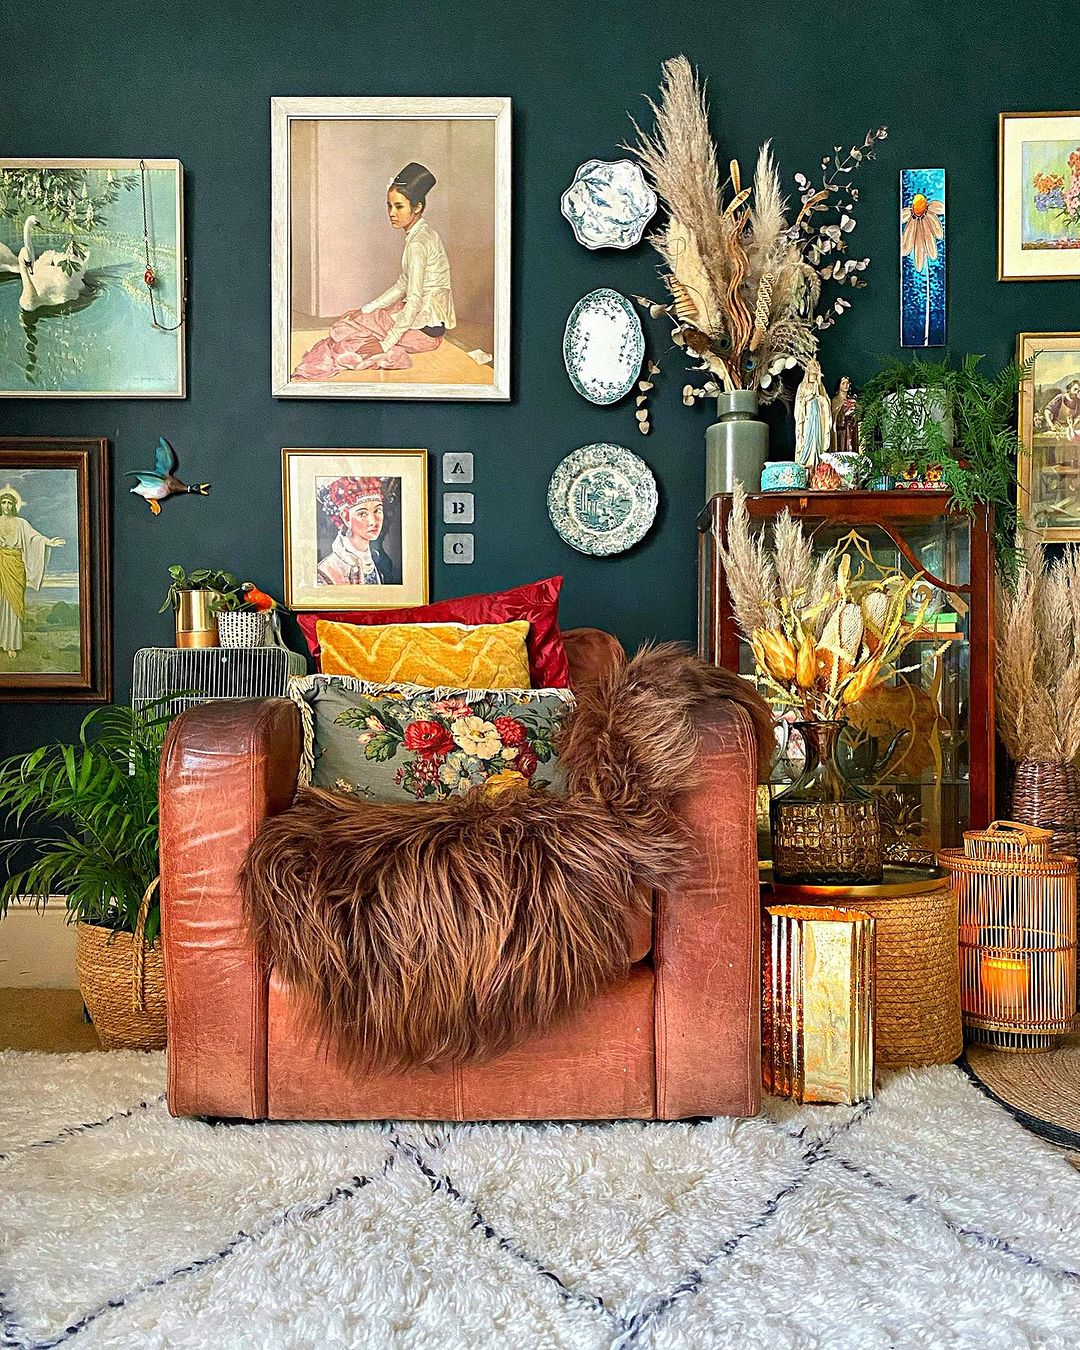 Colorful living space with leather armchair and loads of decorations and paintings on the walls